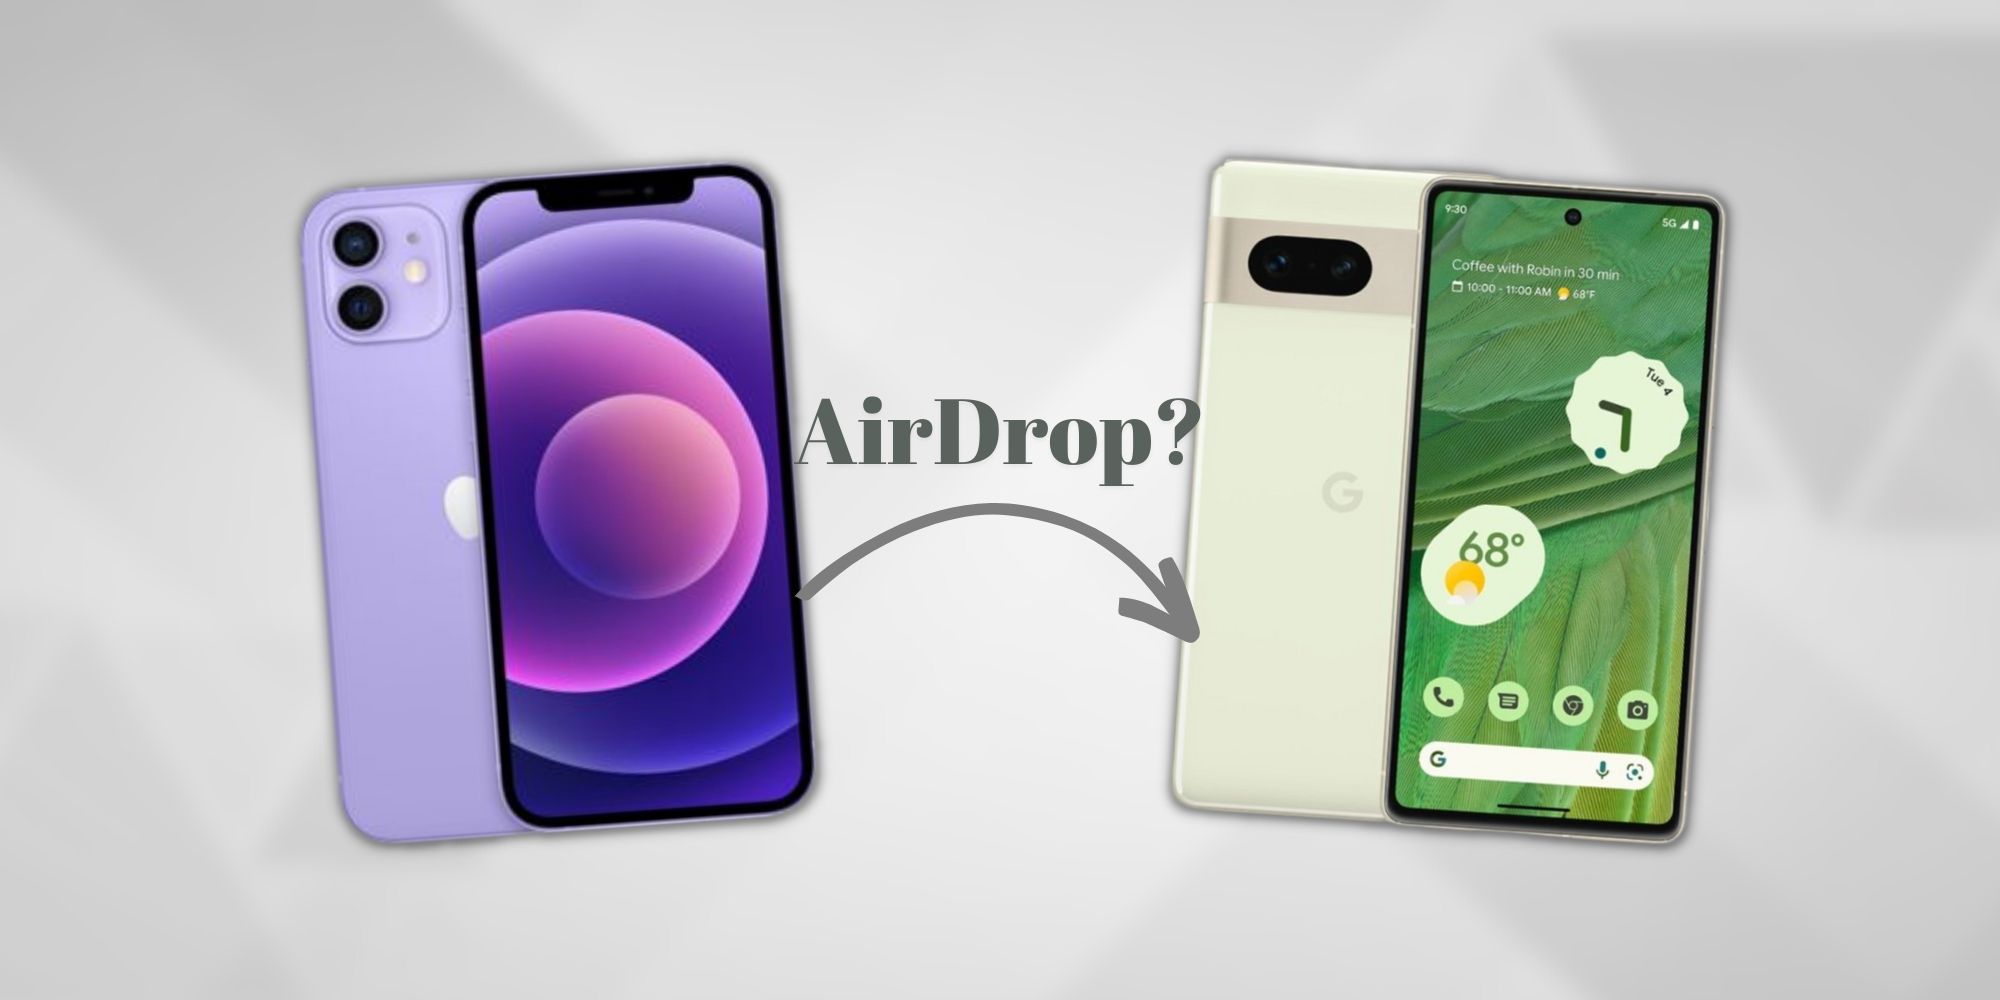 iPhone and Android phone with the text AirDrop and an arrow